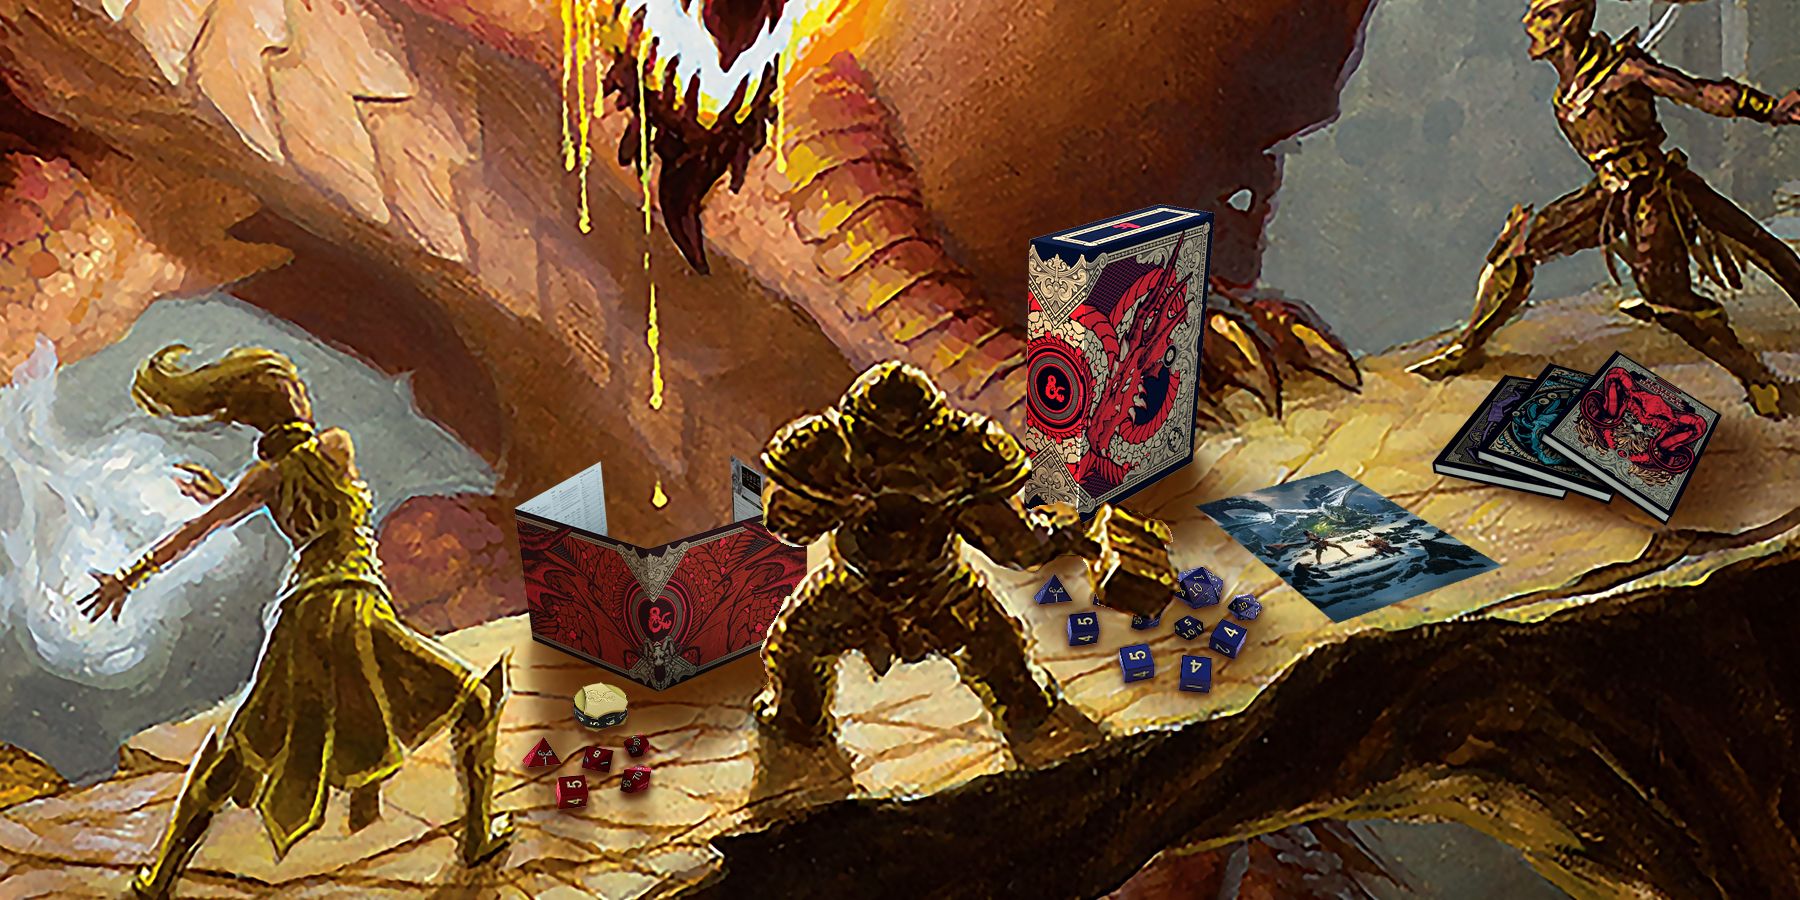 Dungeons & Dragons: Tips For First-Time Players